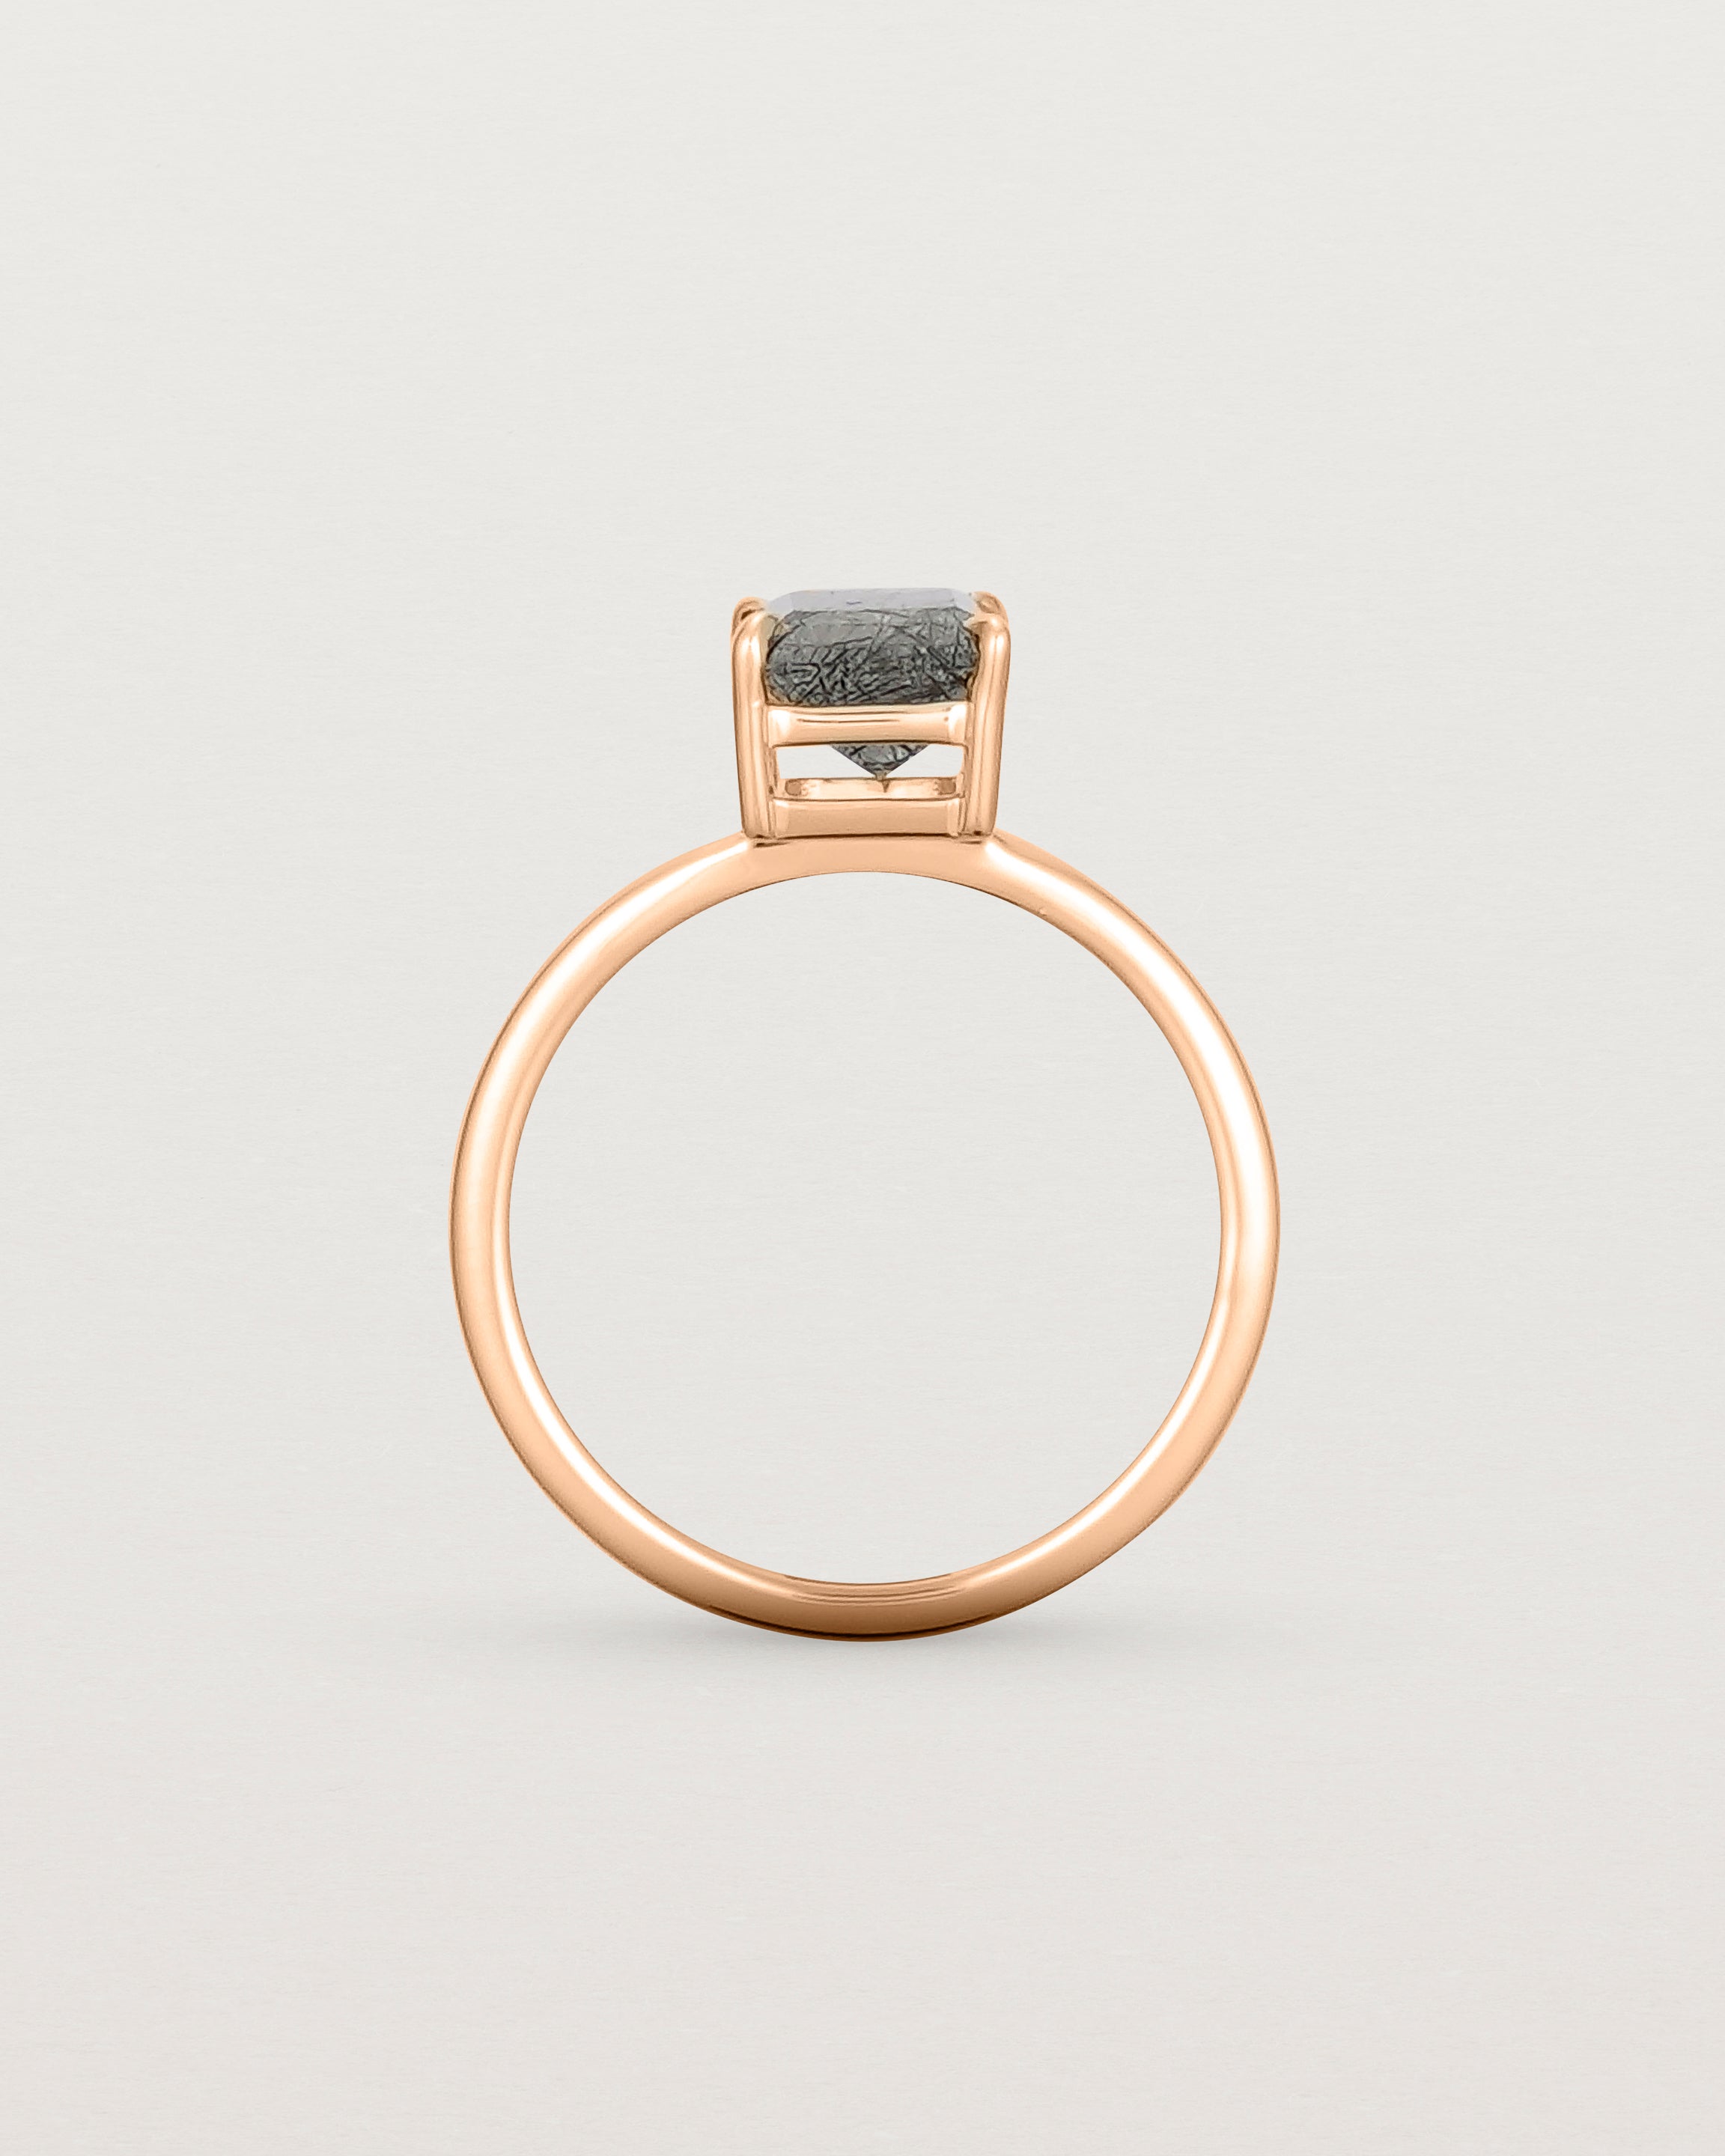 Standing view of the Una Emerald Solitaire | Tourmalinated Quartz | Rose Gold.